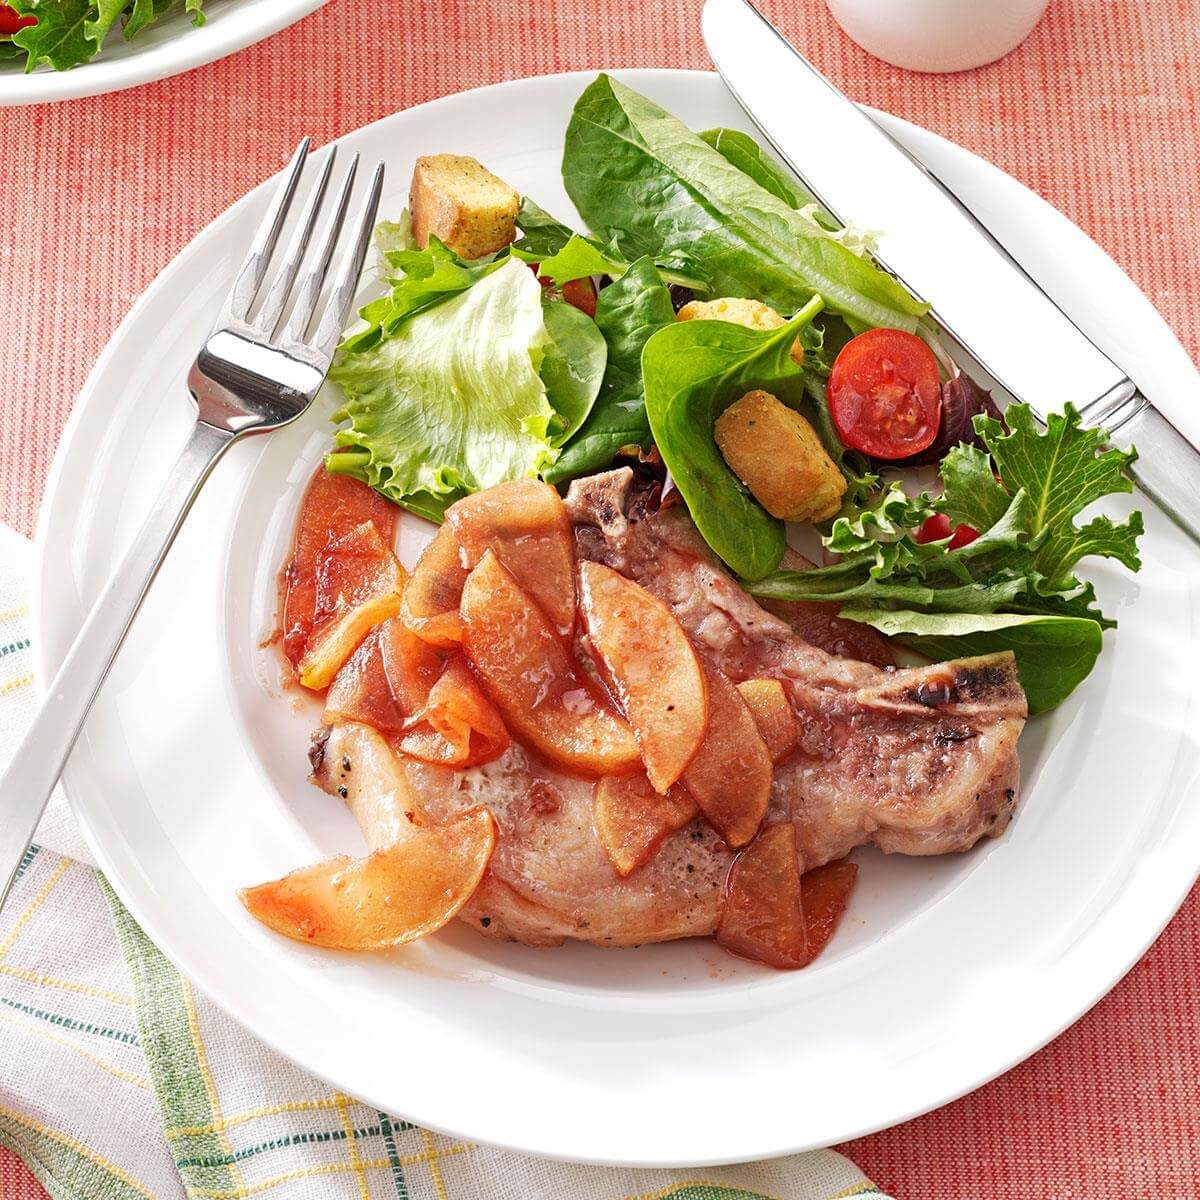 Baked Pork Chops with Apple Slices